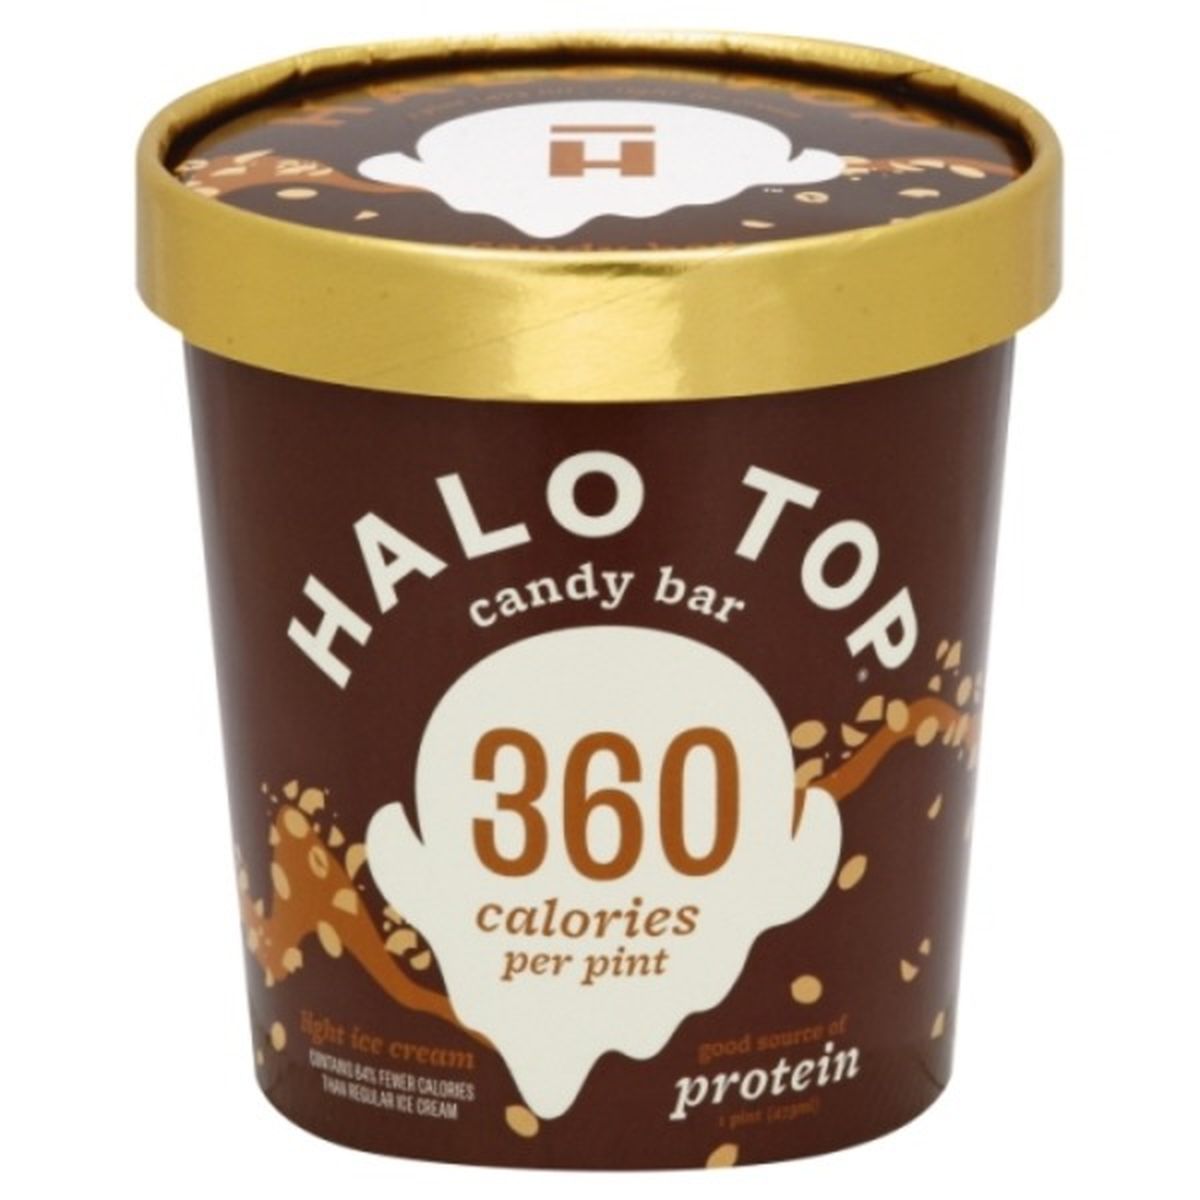 Calories in Halo Top Ice Cream, Light, Candy Bar